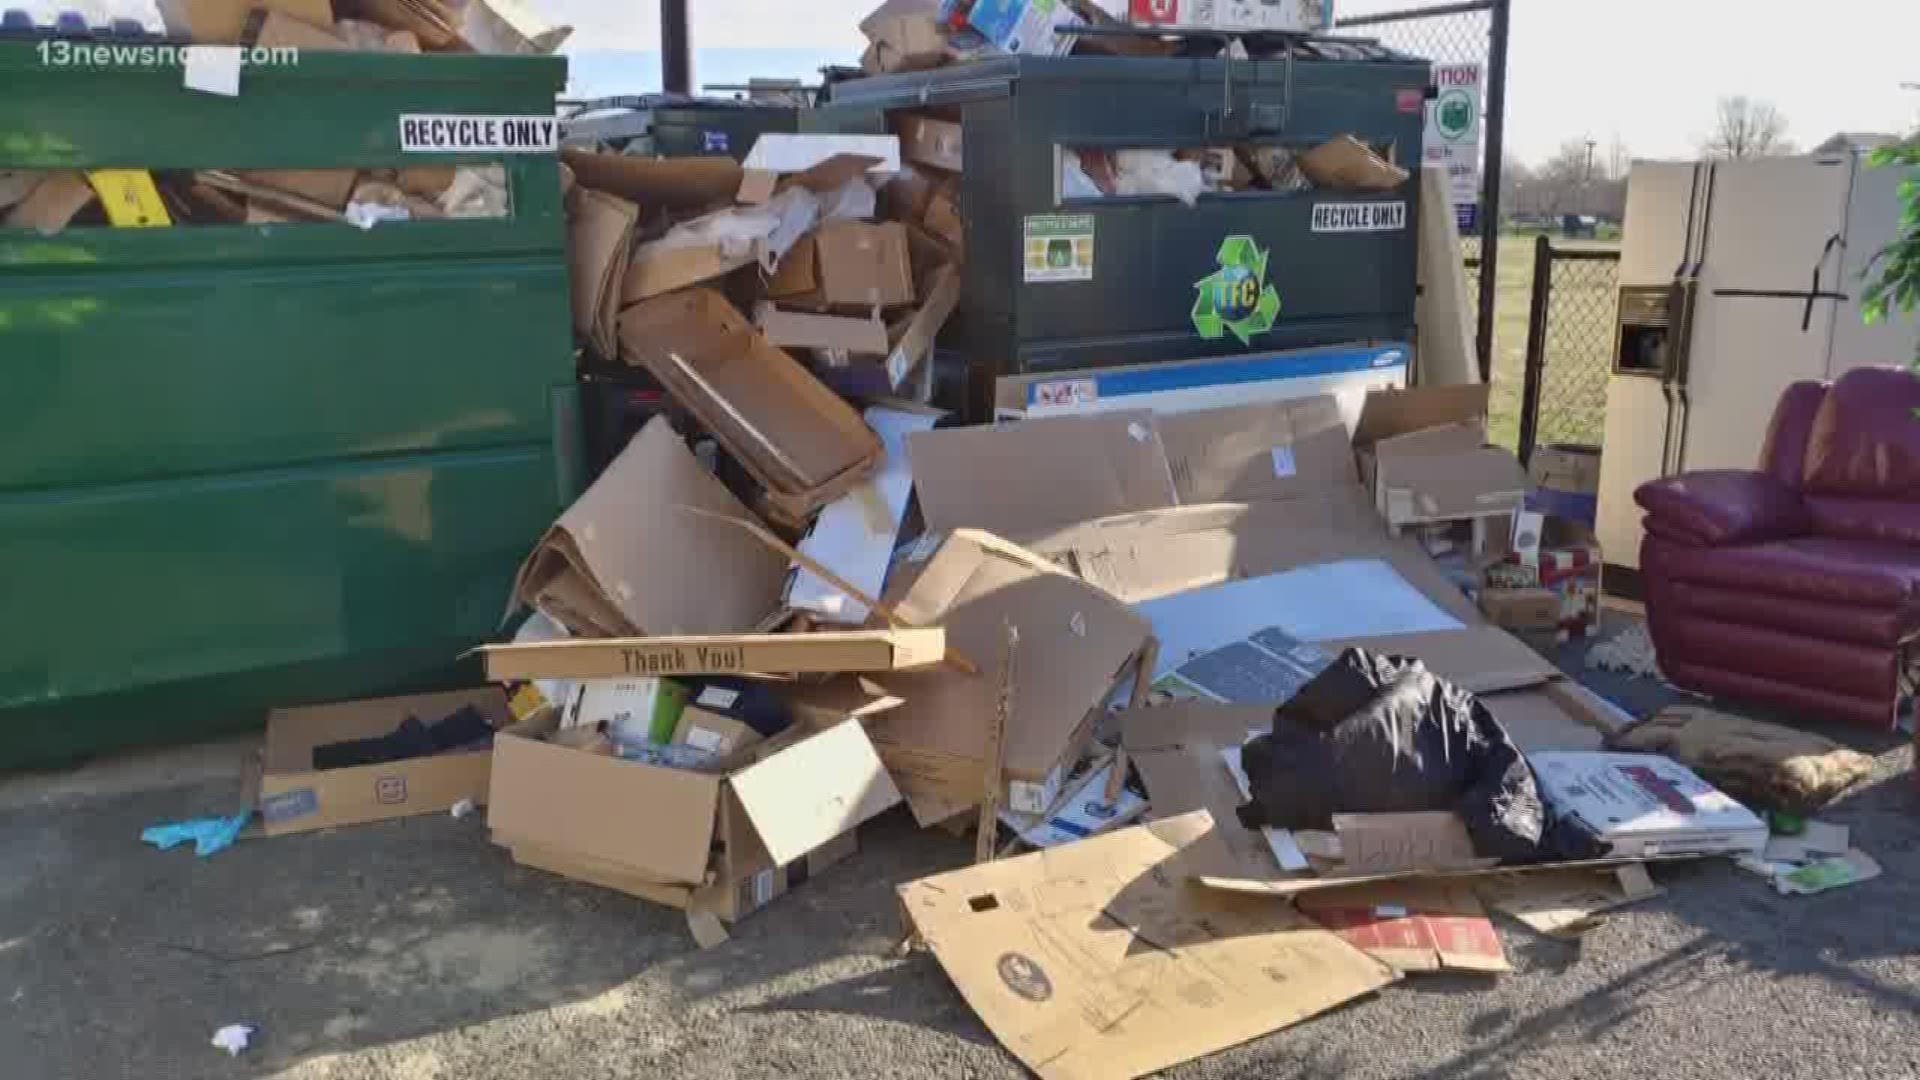 The Oceana and West Neck Recycling Centers will close each evening at 5 p.m. due to people illegally dumping trash.